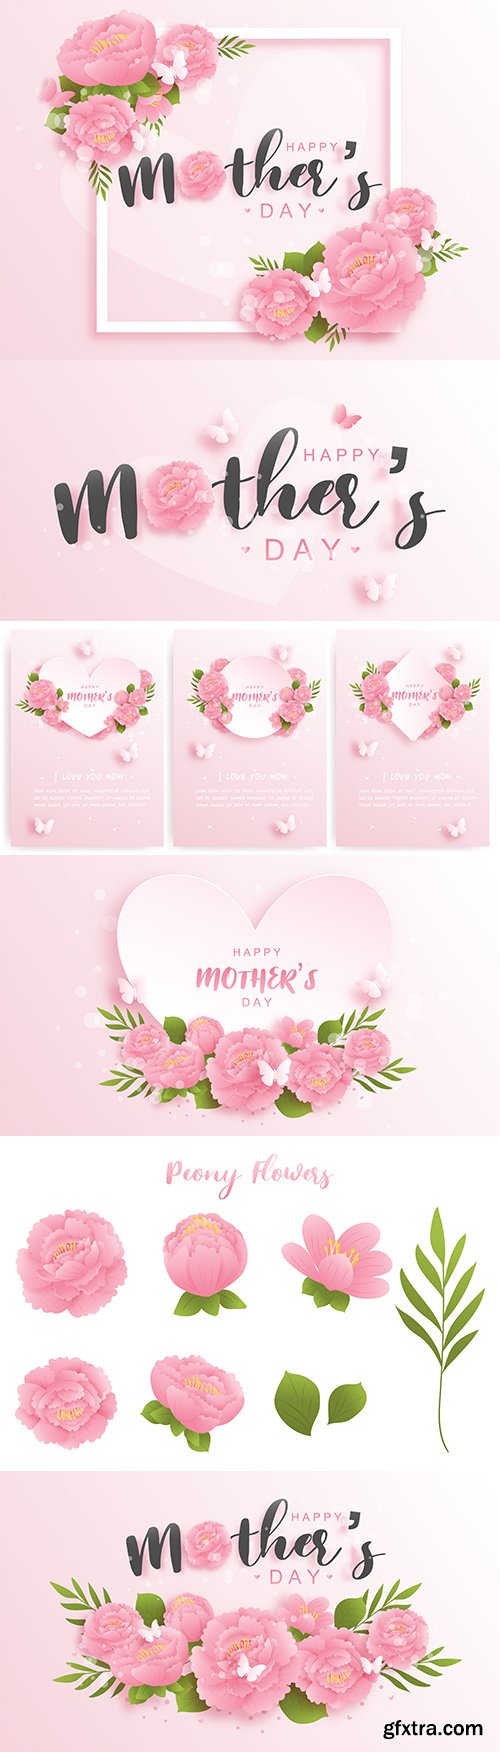 Happy Mother \'s Day background with colorful flowers